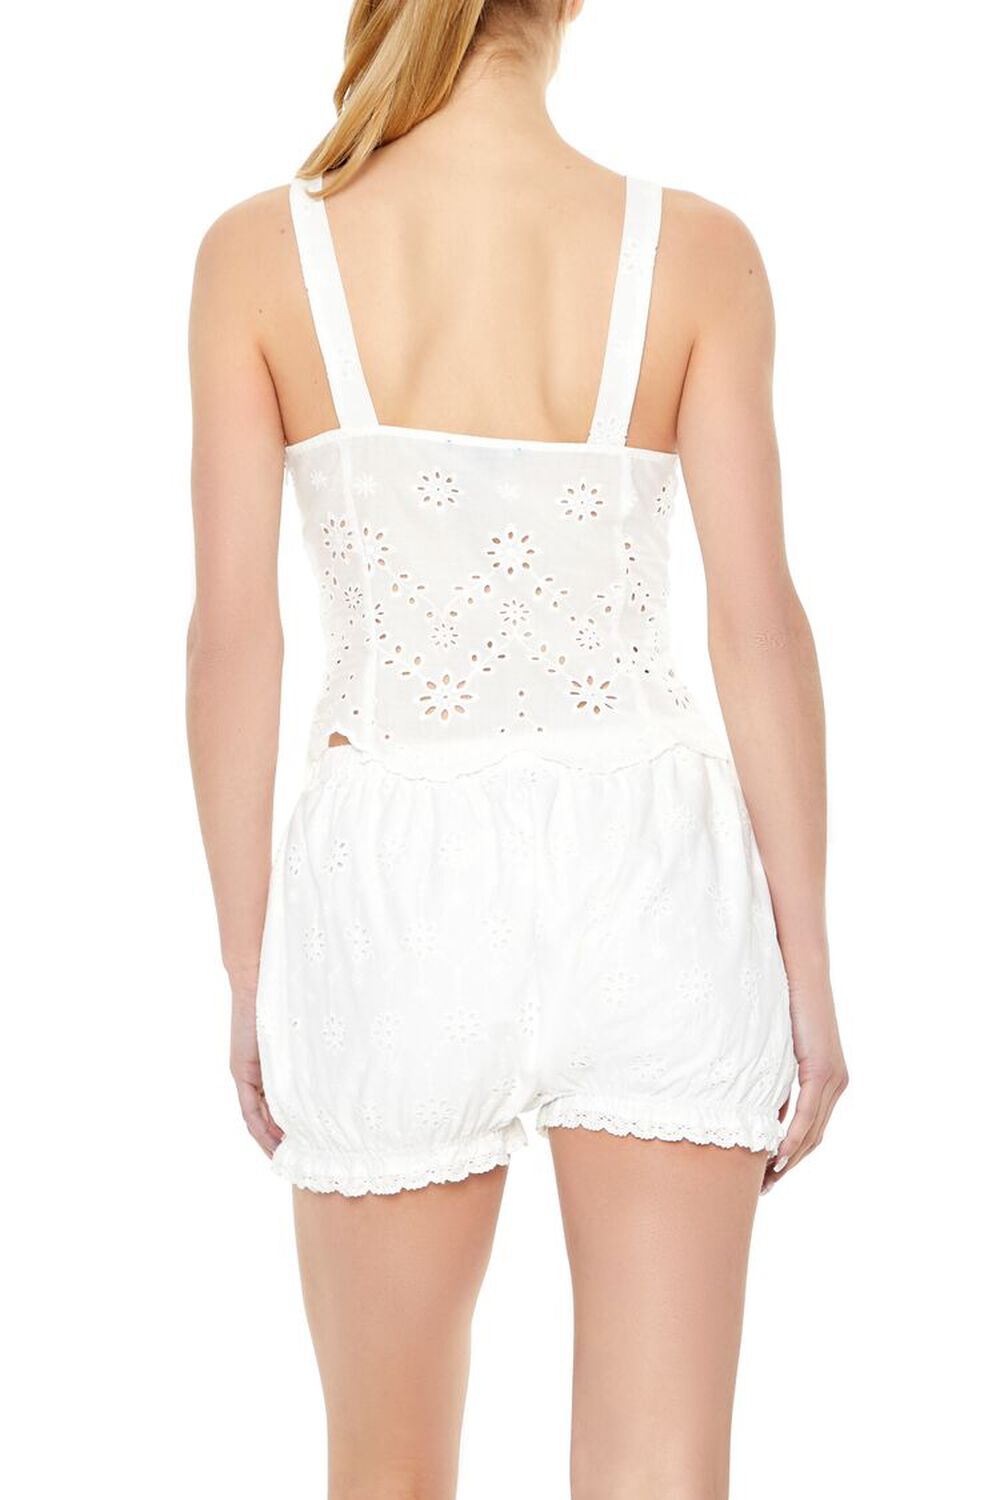 WHITE Floral Eyelet Bustier Top, image 3